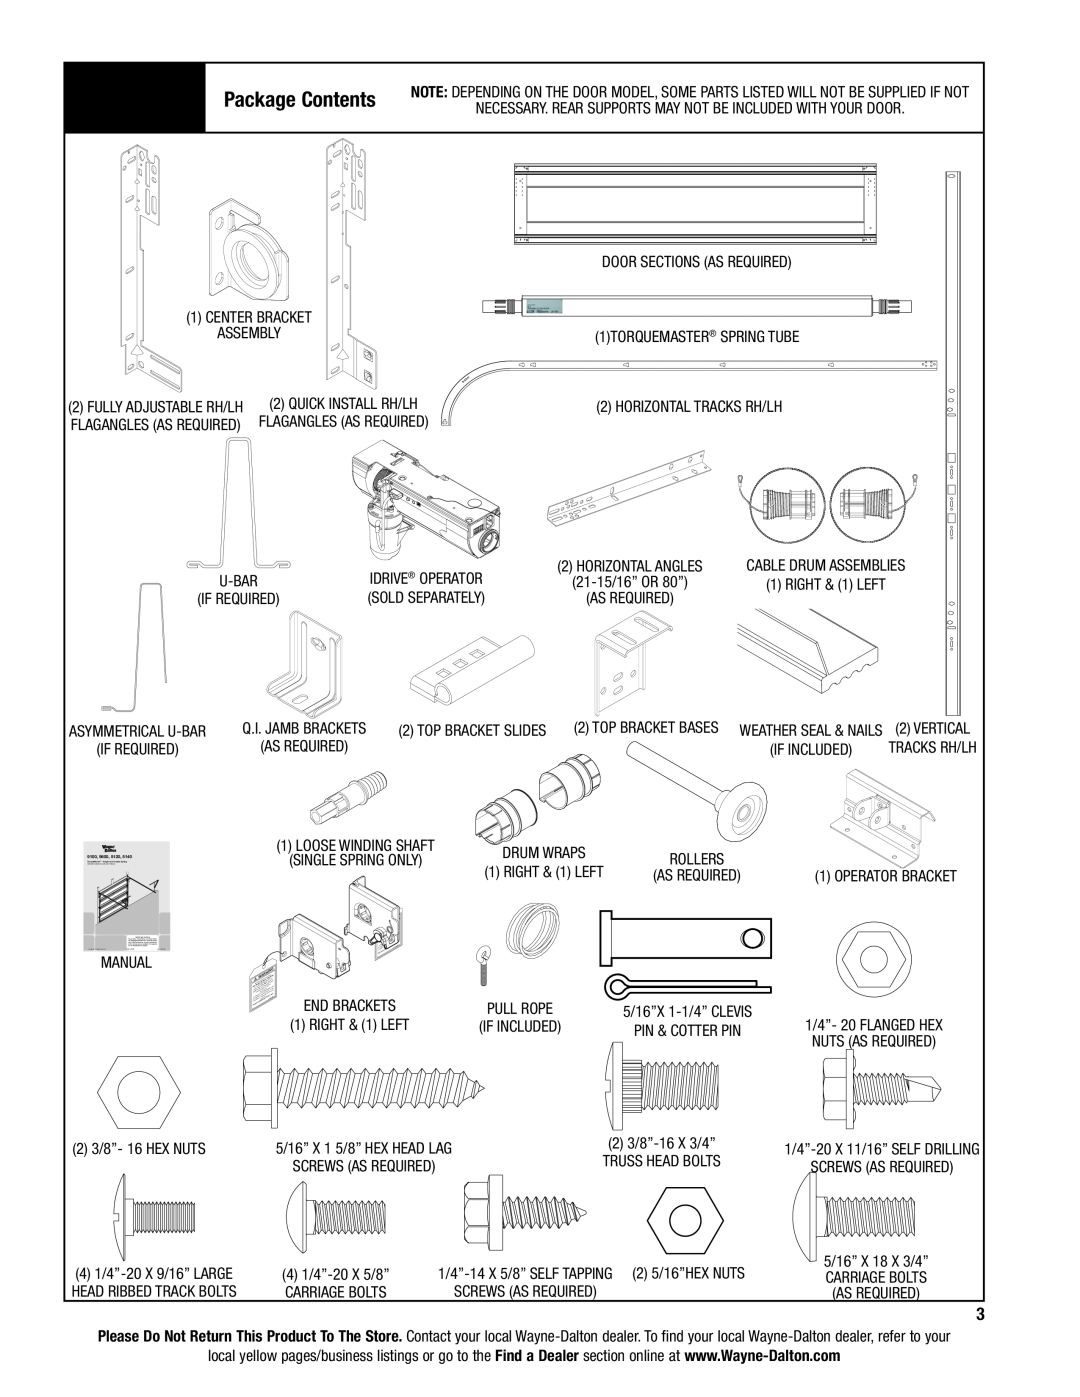 Wayne-Dalton AND 9600, 9400 installation instructions Package Contents 